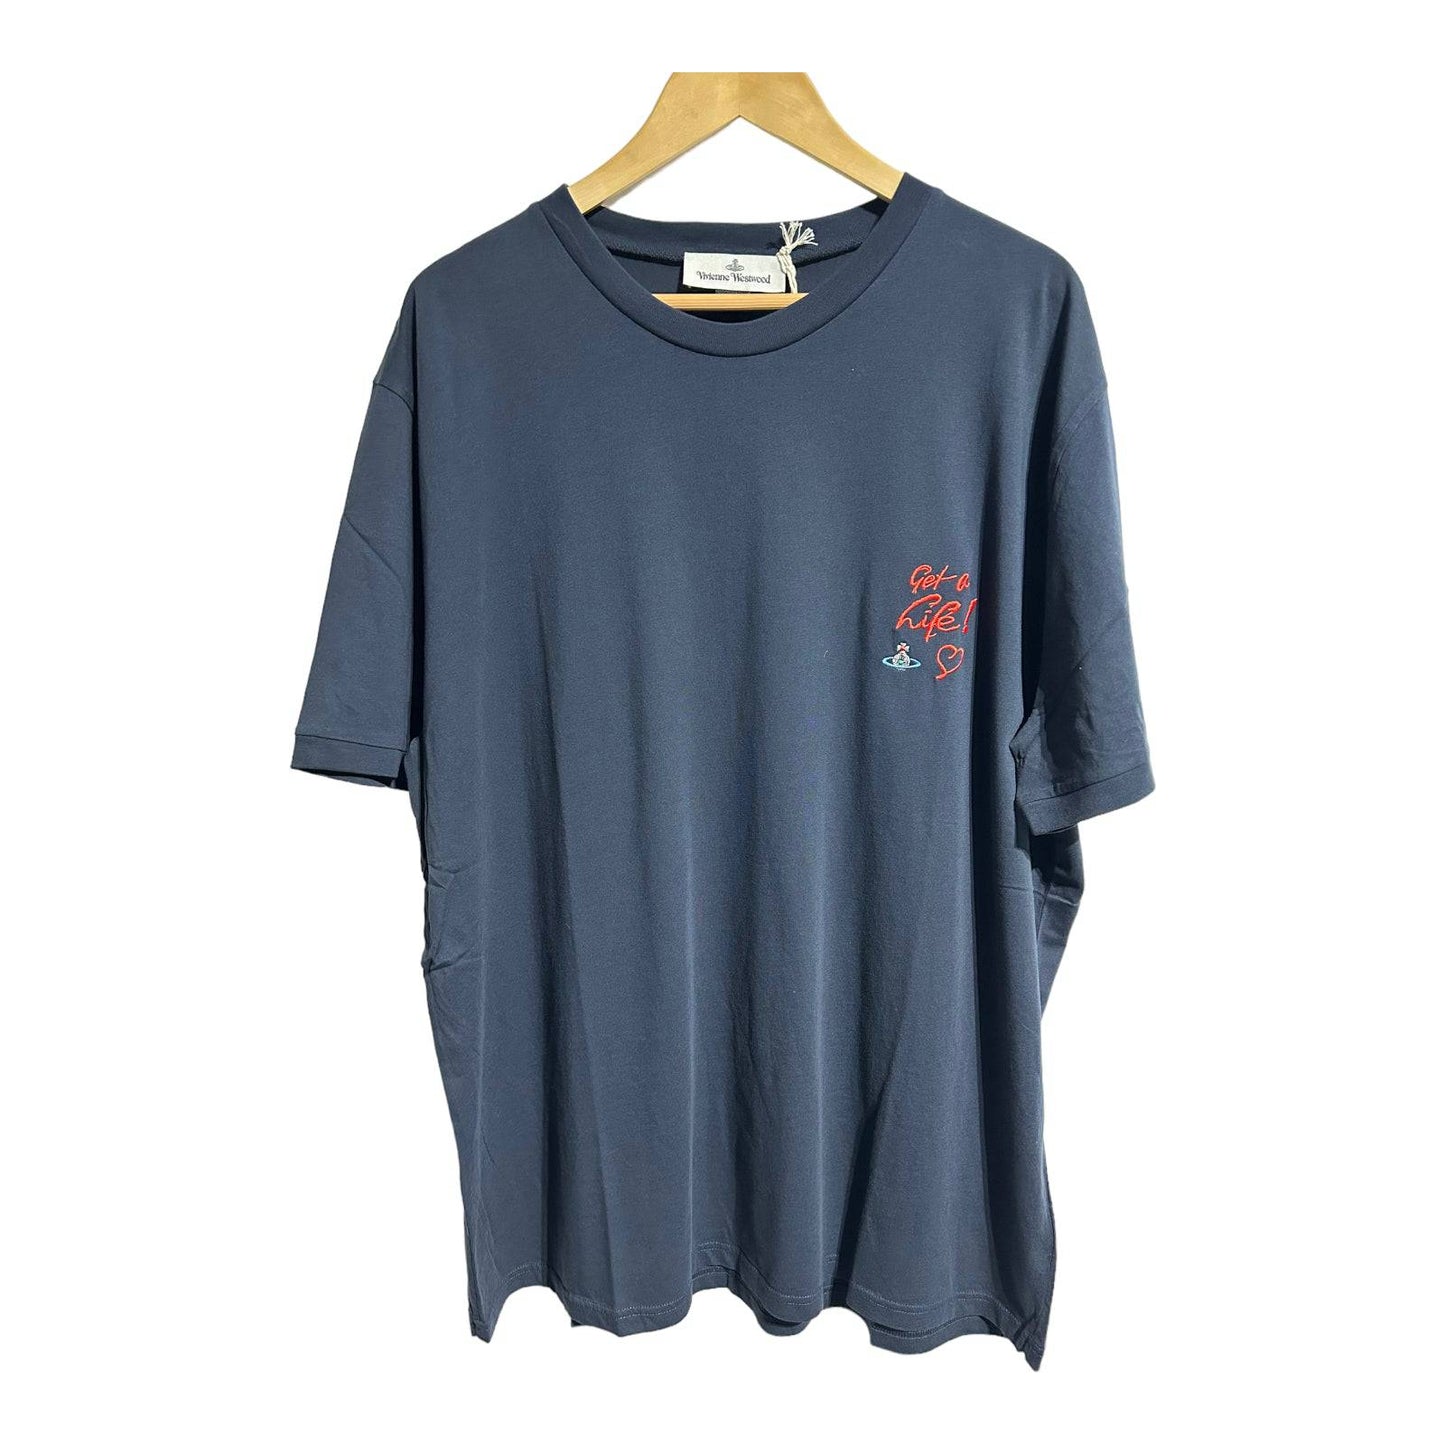 Vivienne Westwood Oversized 'Get a Life' T-Shirt - Recurring.Life